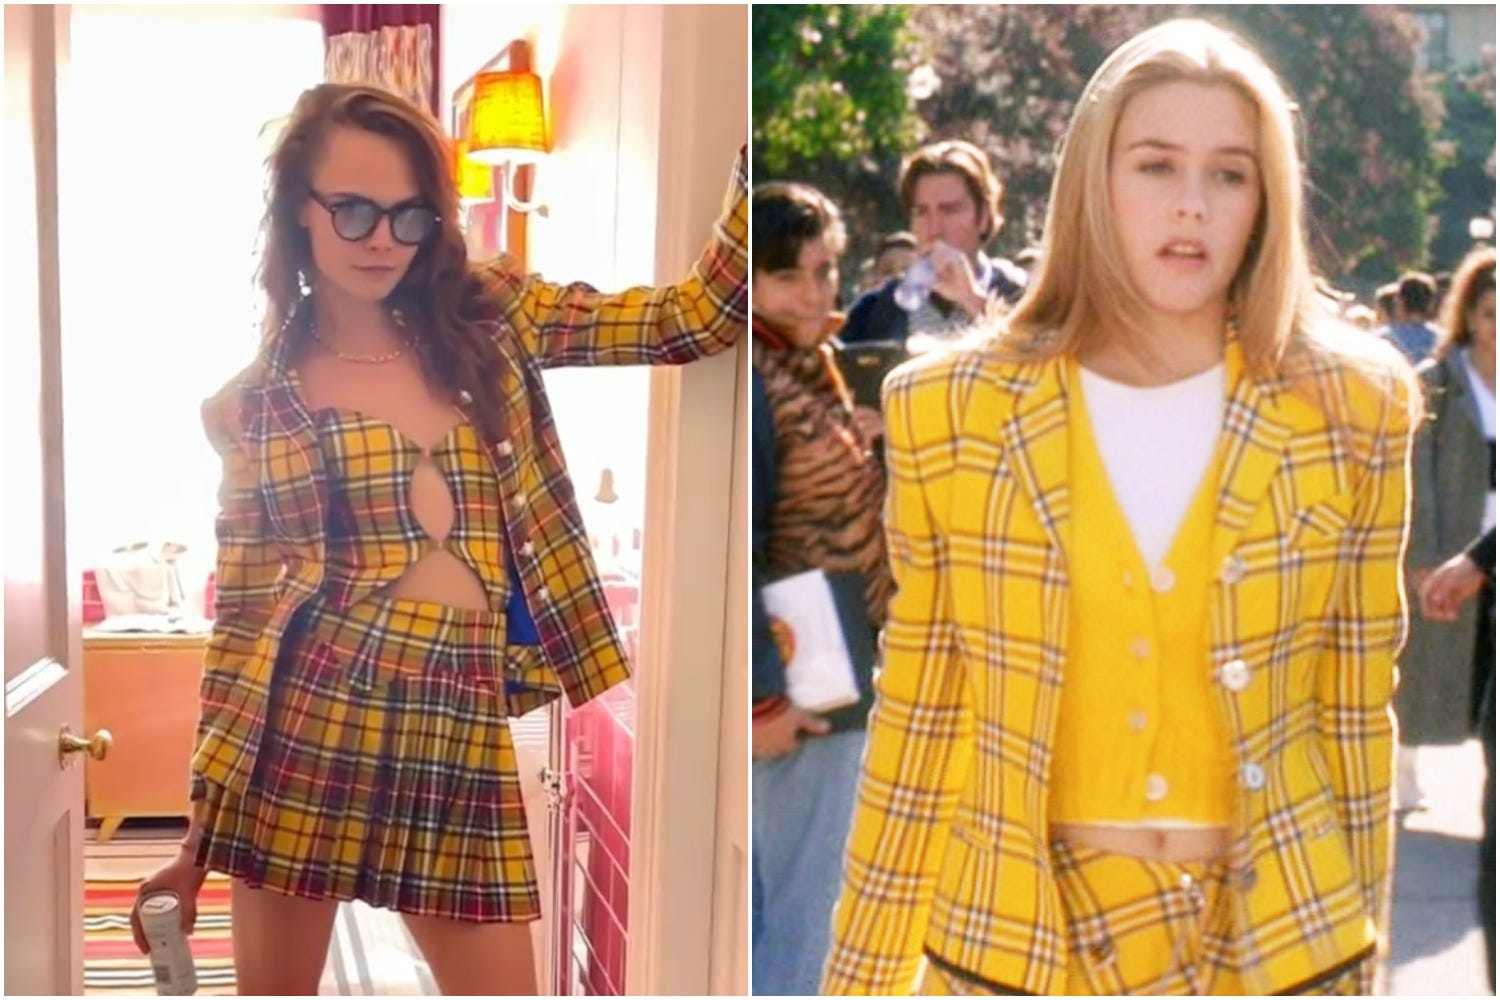 A side by side of model Cara Delevingne wearing an outfit inspired by the character Cher from Clueless.